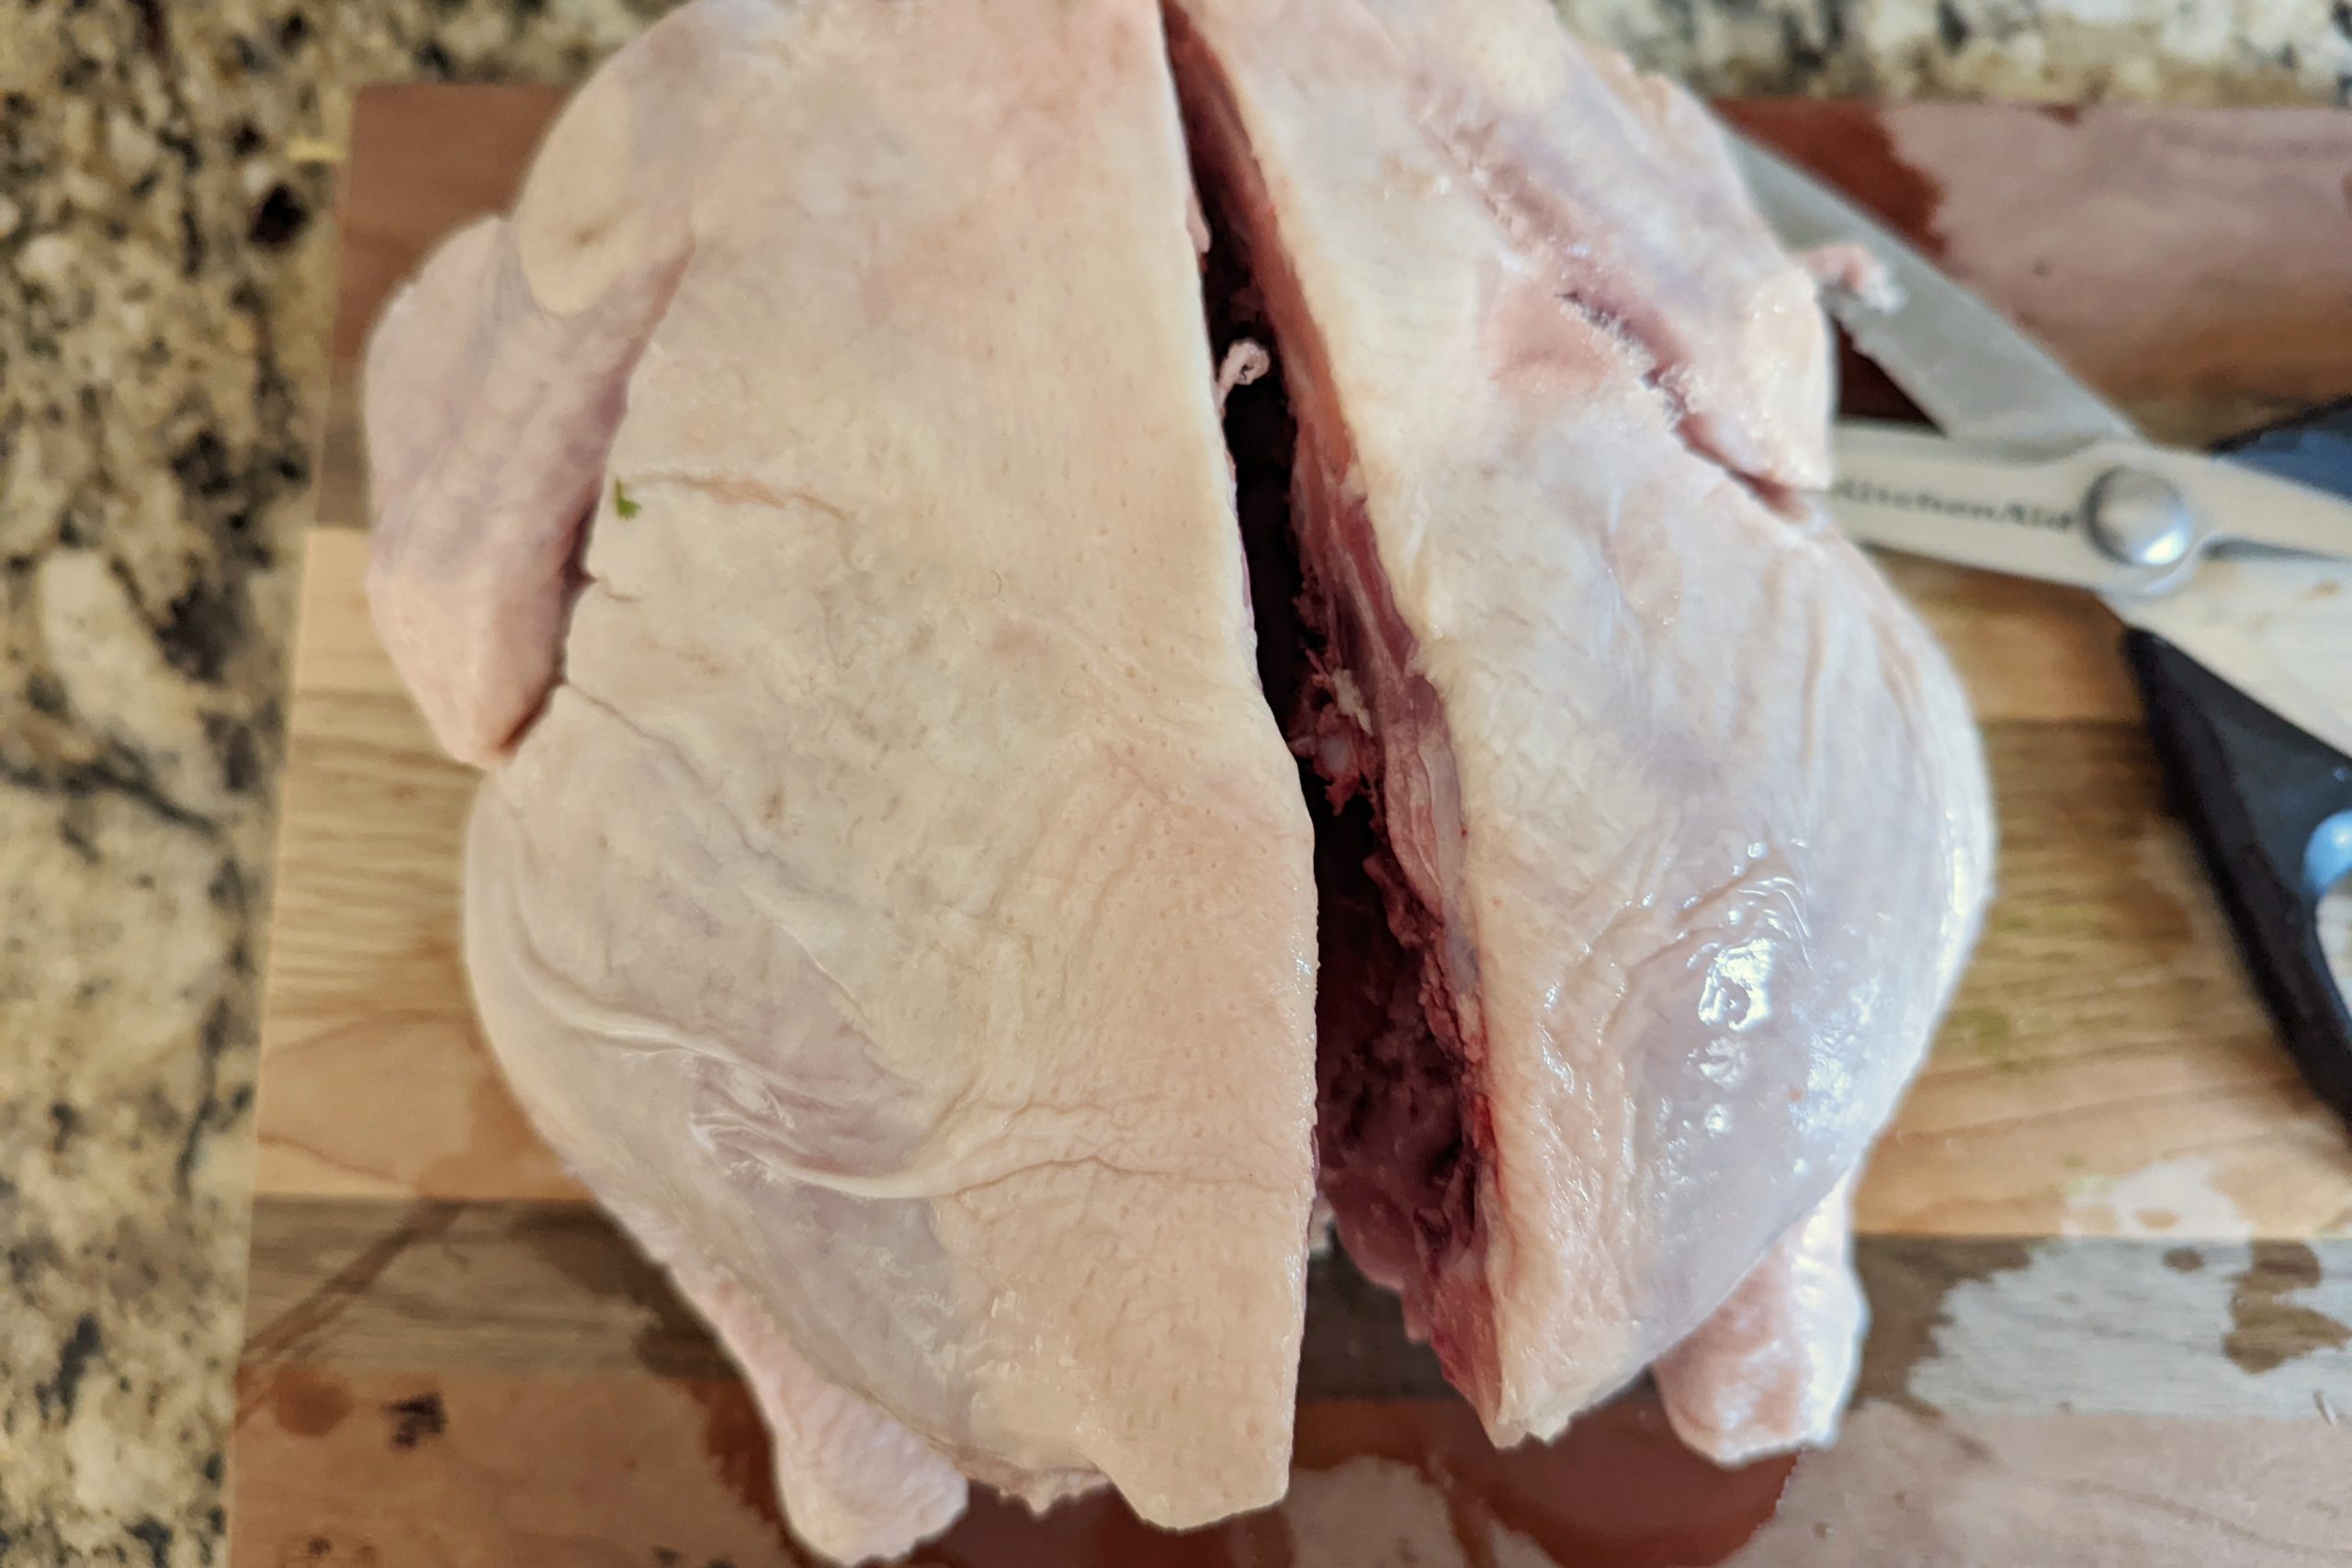 A slit up the spine of the whole raw chicken. 